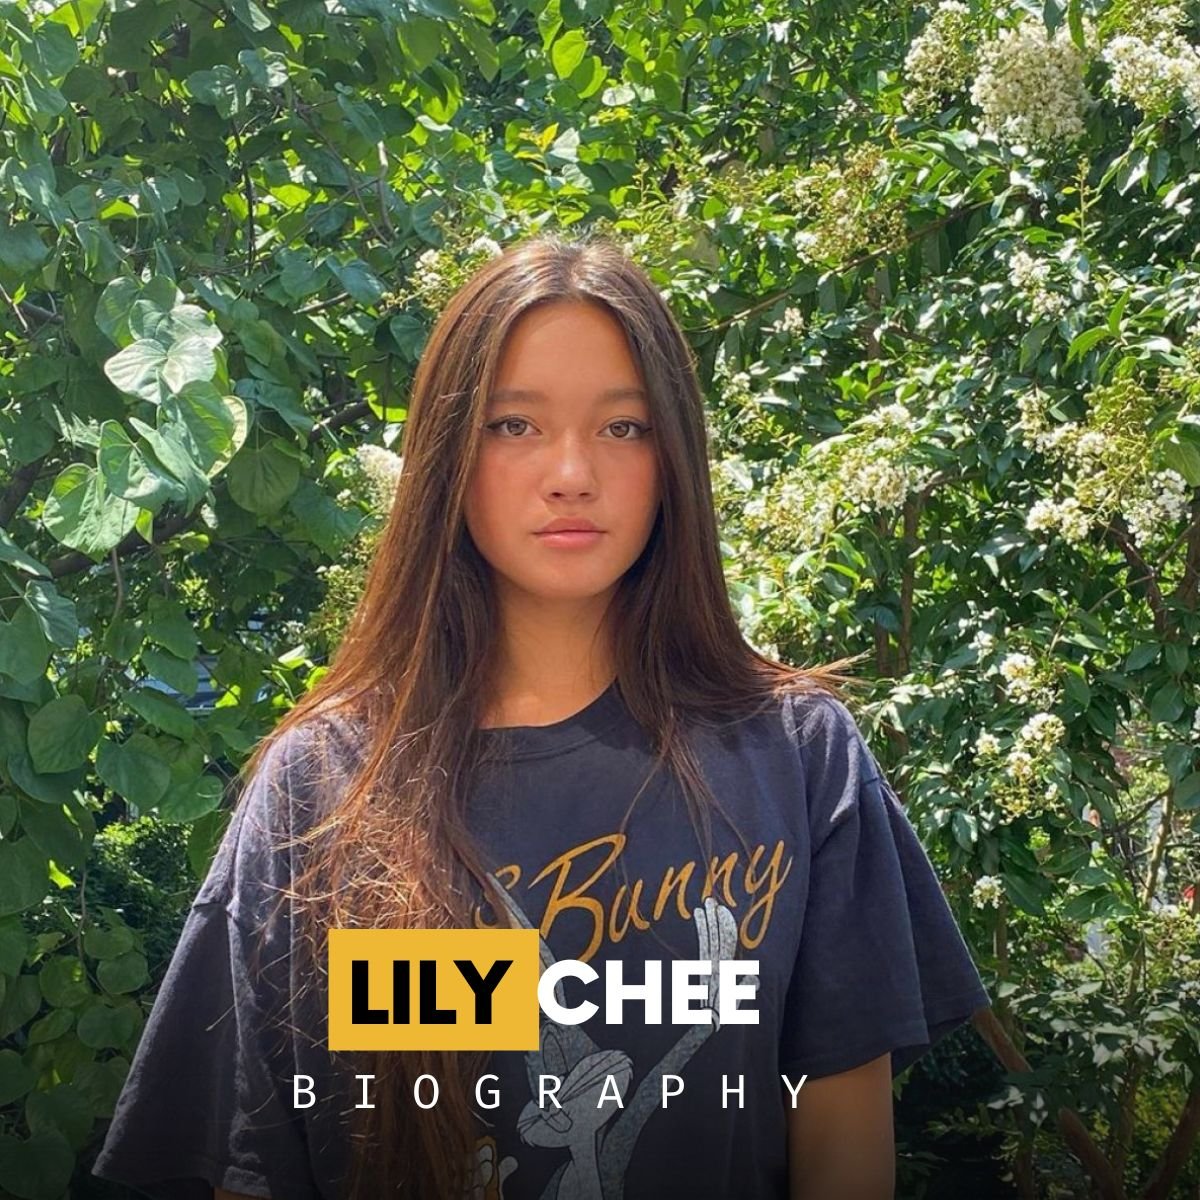 Who Is Lily Chee? Get Know All About Her Age, Career, Net Worth, And More